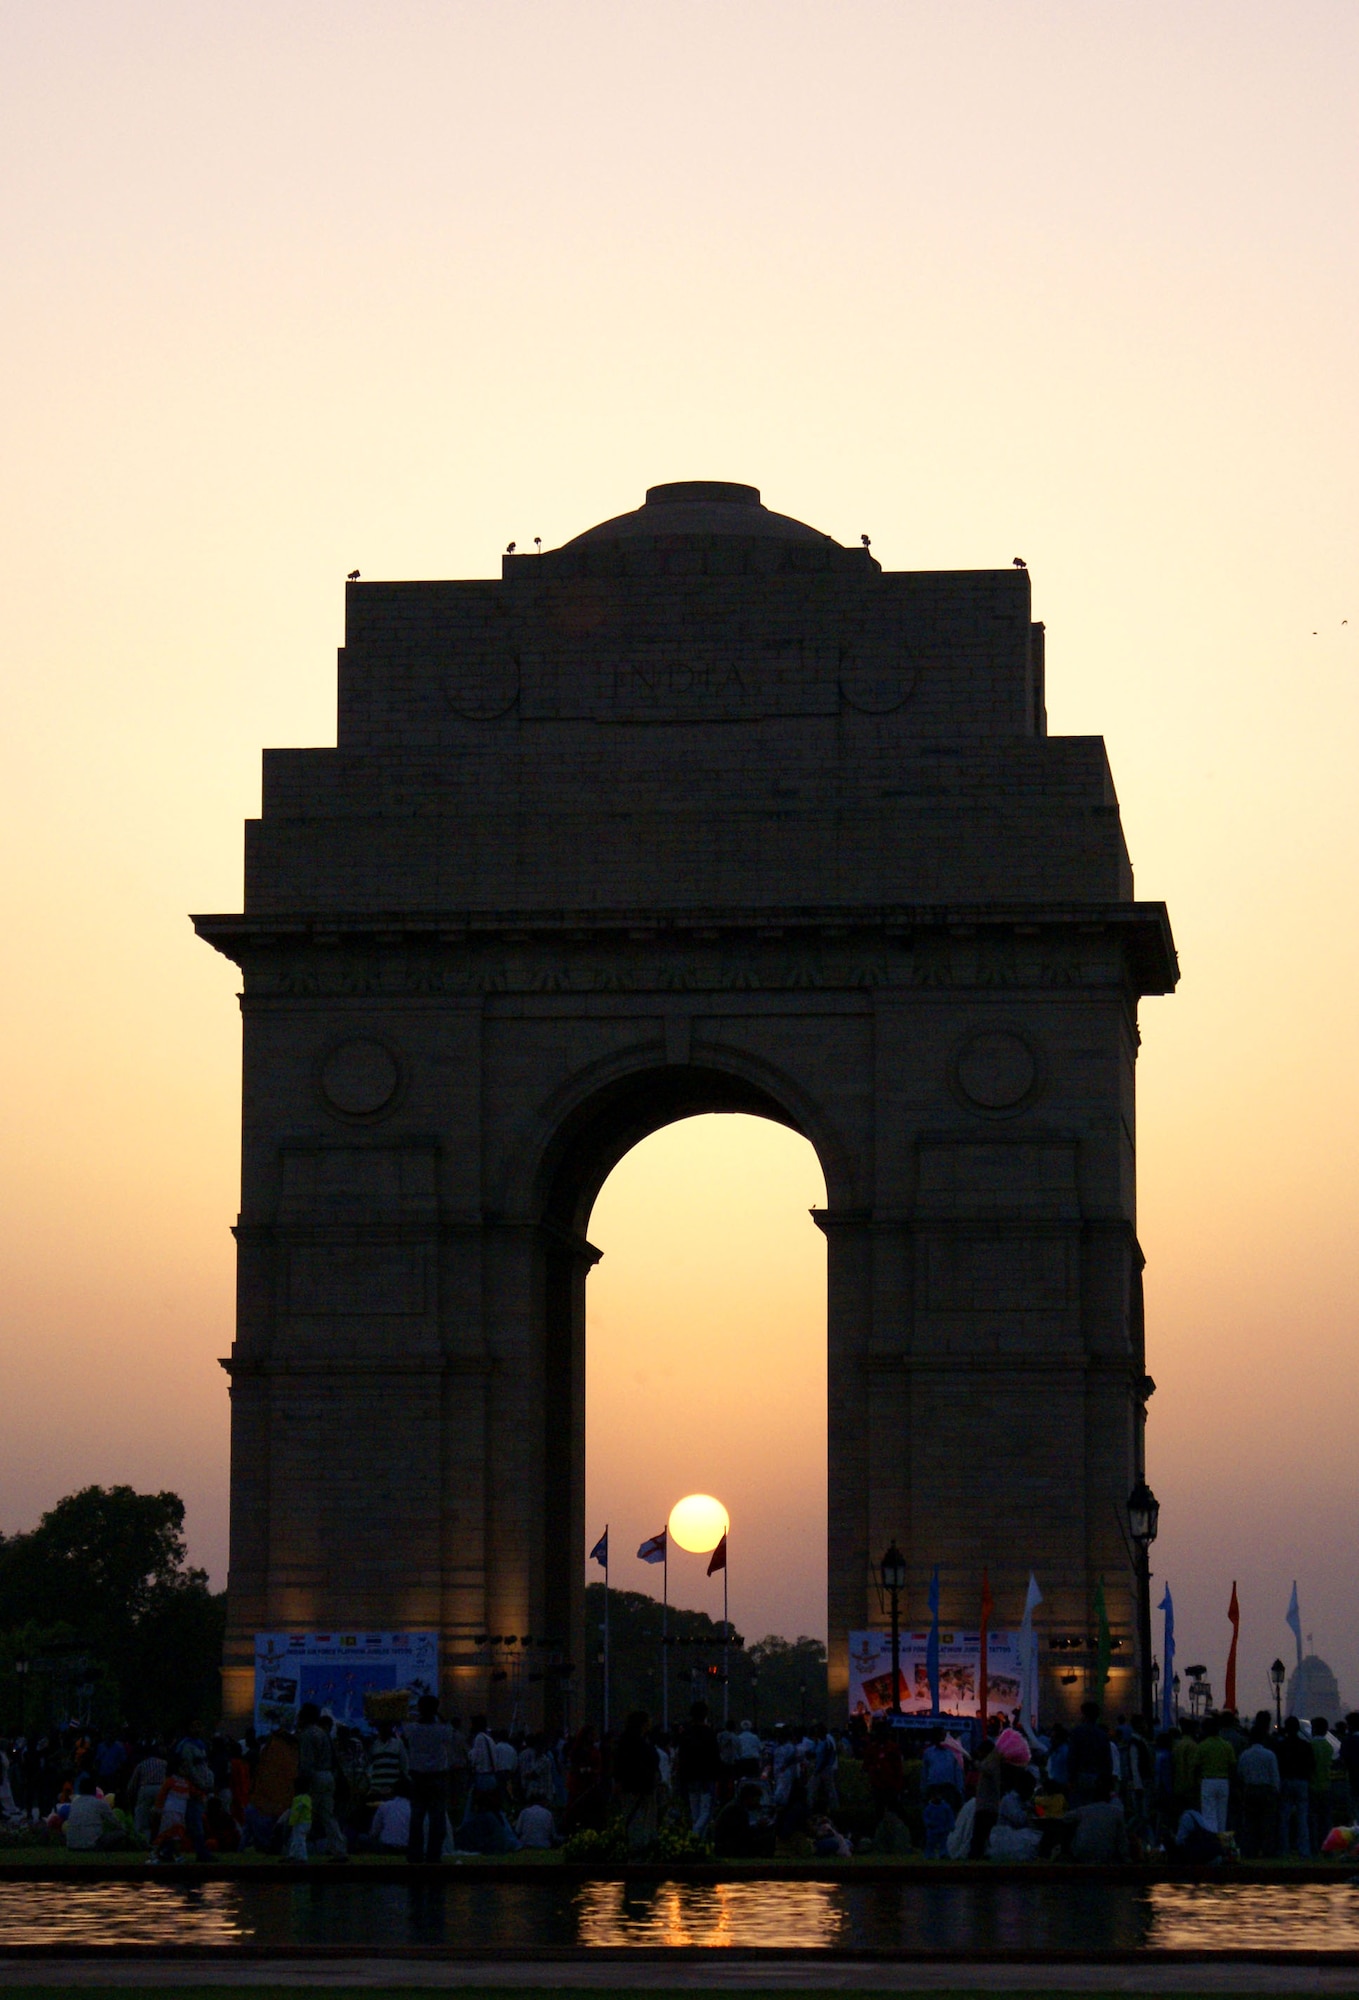 The sun sets behind the India Gate in New Delhi March 17, setting the stage for the evening portion of the Indian Air Force Platinum Jubilee Tattoo. The Pacific Air Forces rock band Pacific Trends was invited to take part in the multinational celebration, which included military bands from India, Singapore, Sri Lanka and Thailand. The IAF celebrates its 75th birthday this year. (U.S. Air Force photo/Marine Cpl. Ashleigh Bryant) 